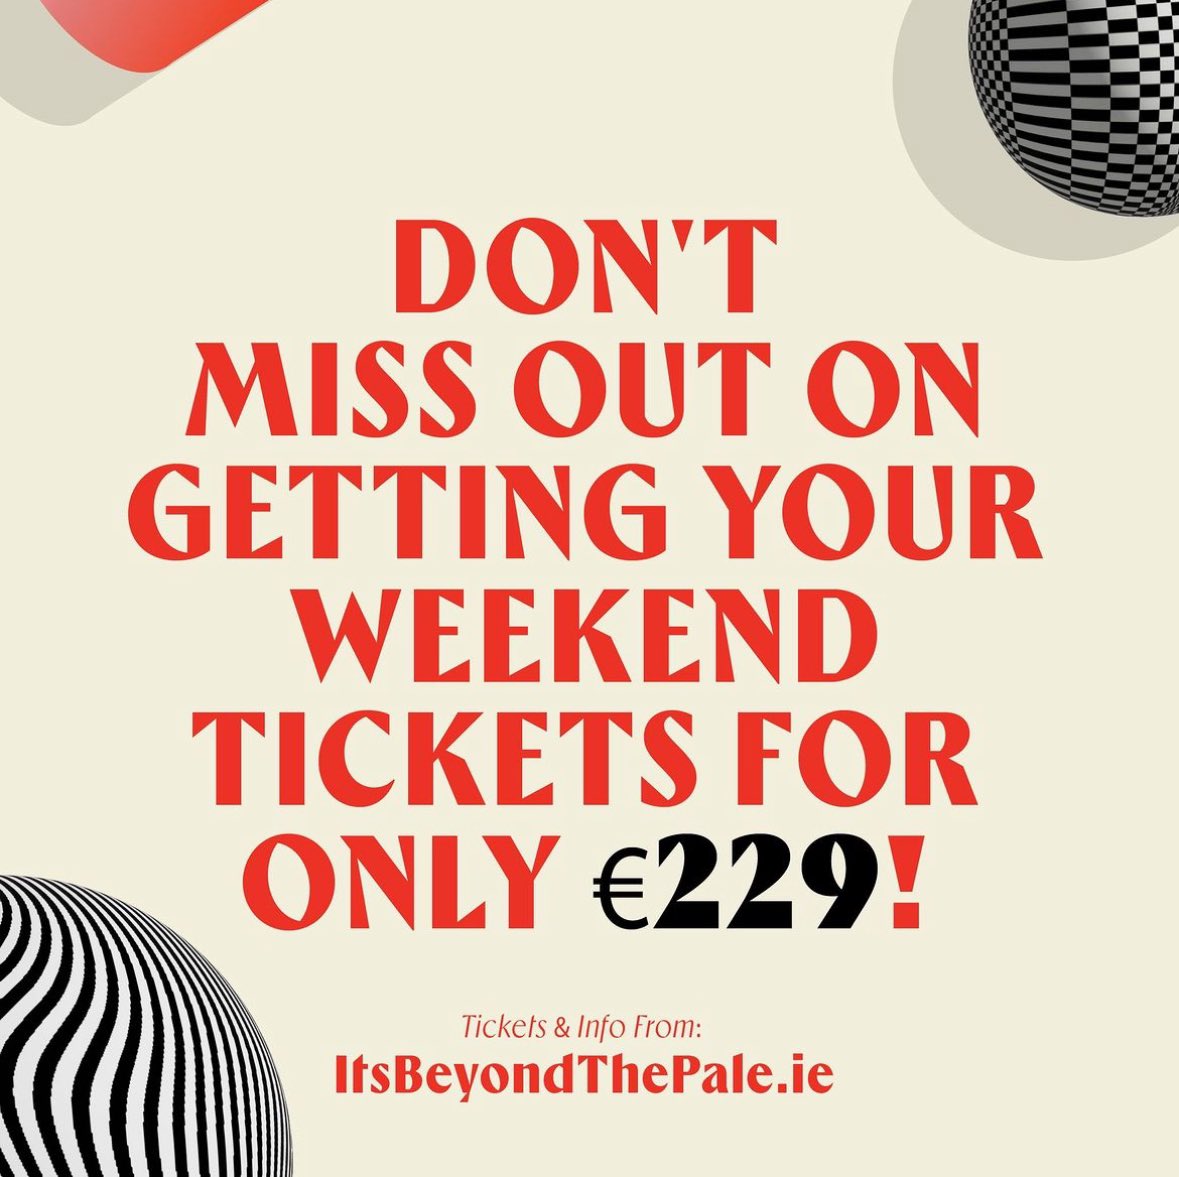 🚨 LAST CHANCE🚨 TONIGHT at 10 PM, our 3-Day Camping ticket prices will rise! 🎟️ Grab your weekend pass for Beyond the Pale now for just €229 before they go up! Or opt for our instalment plan and secure your spot with just €65 upfront. Don't miss your chance to join the